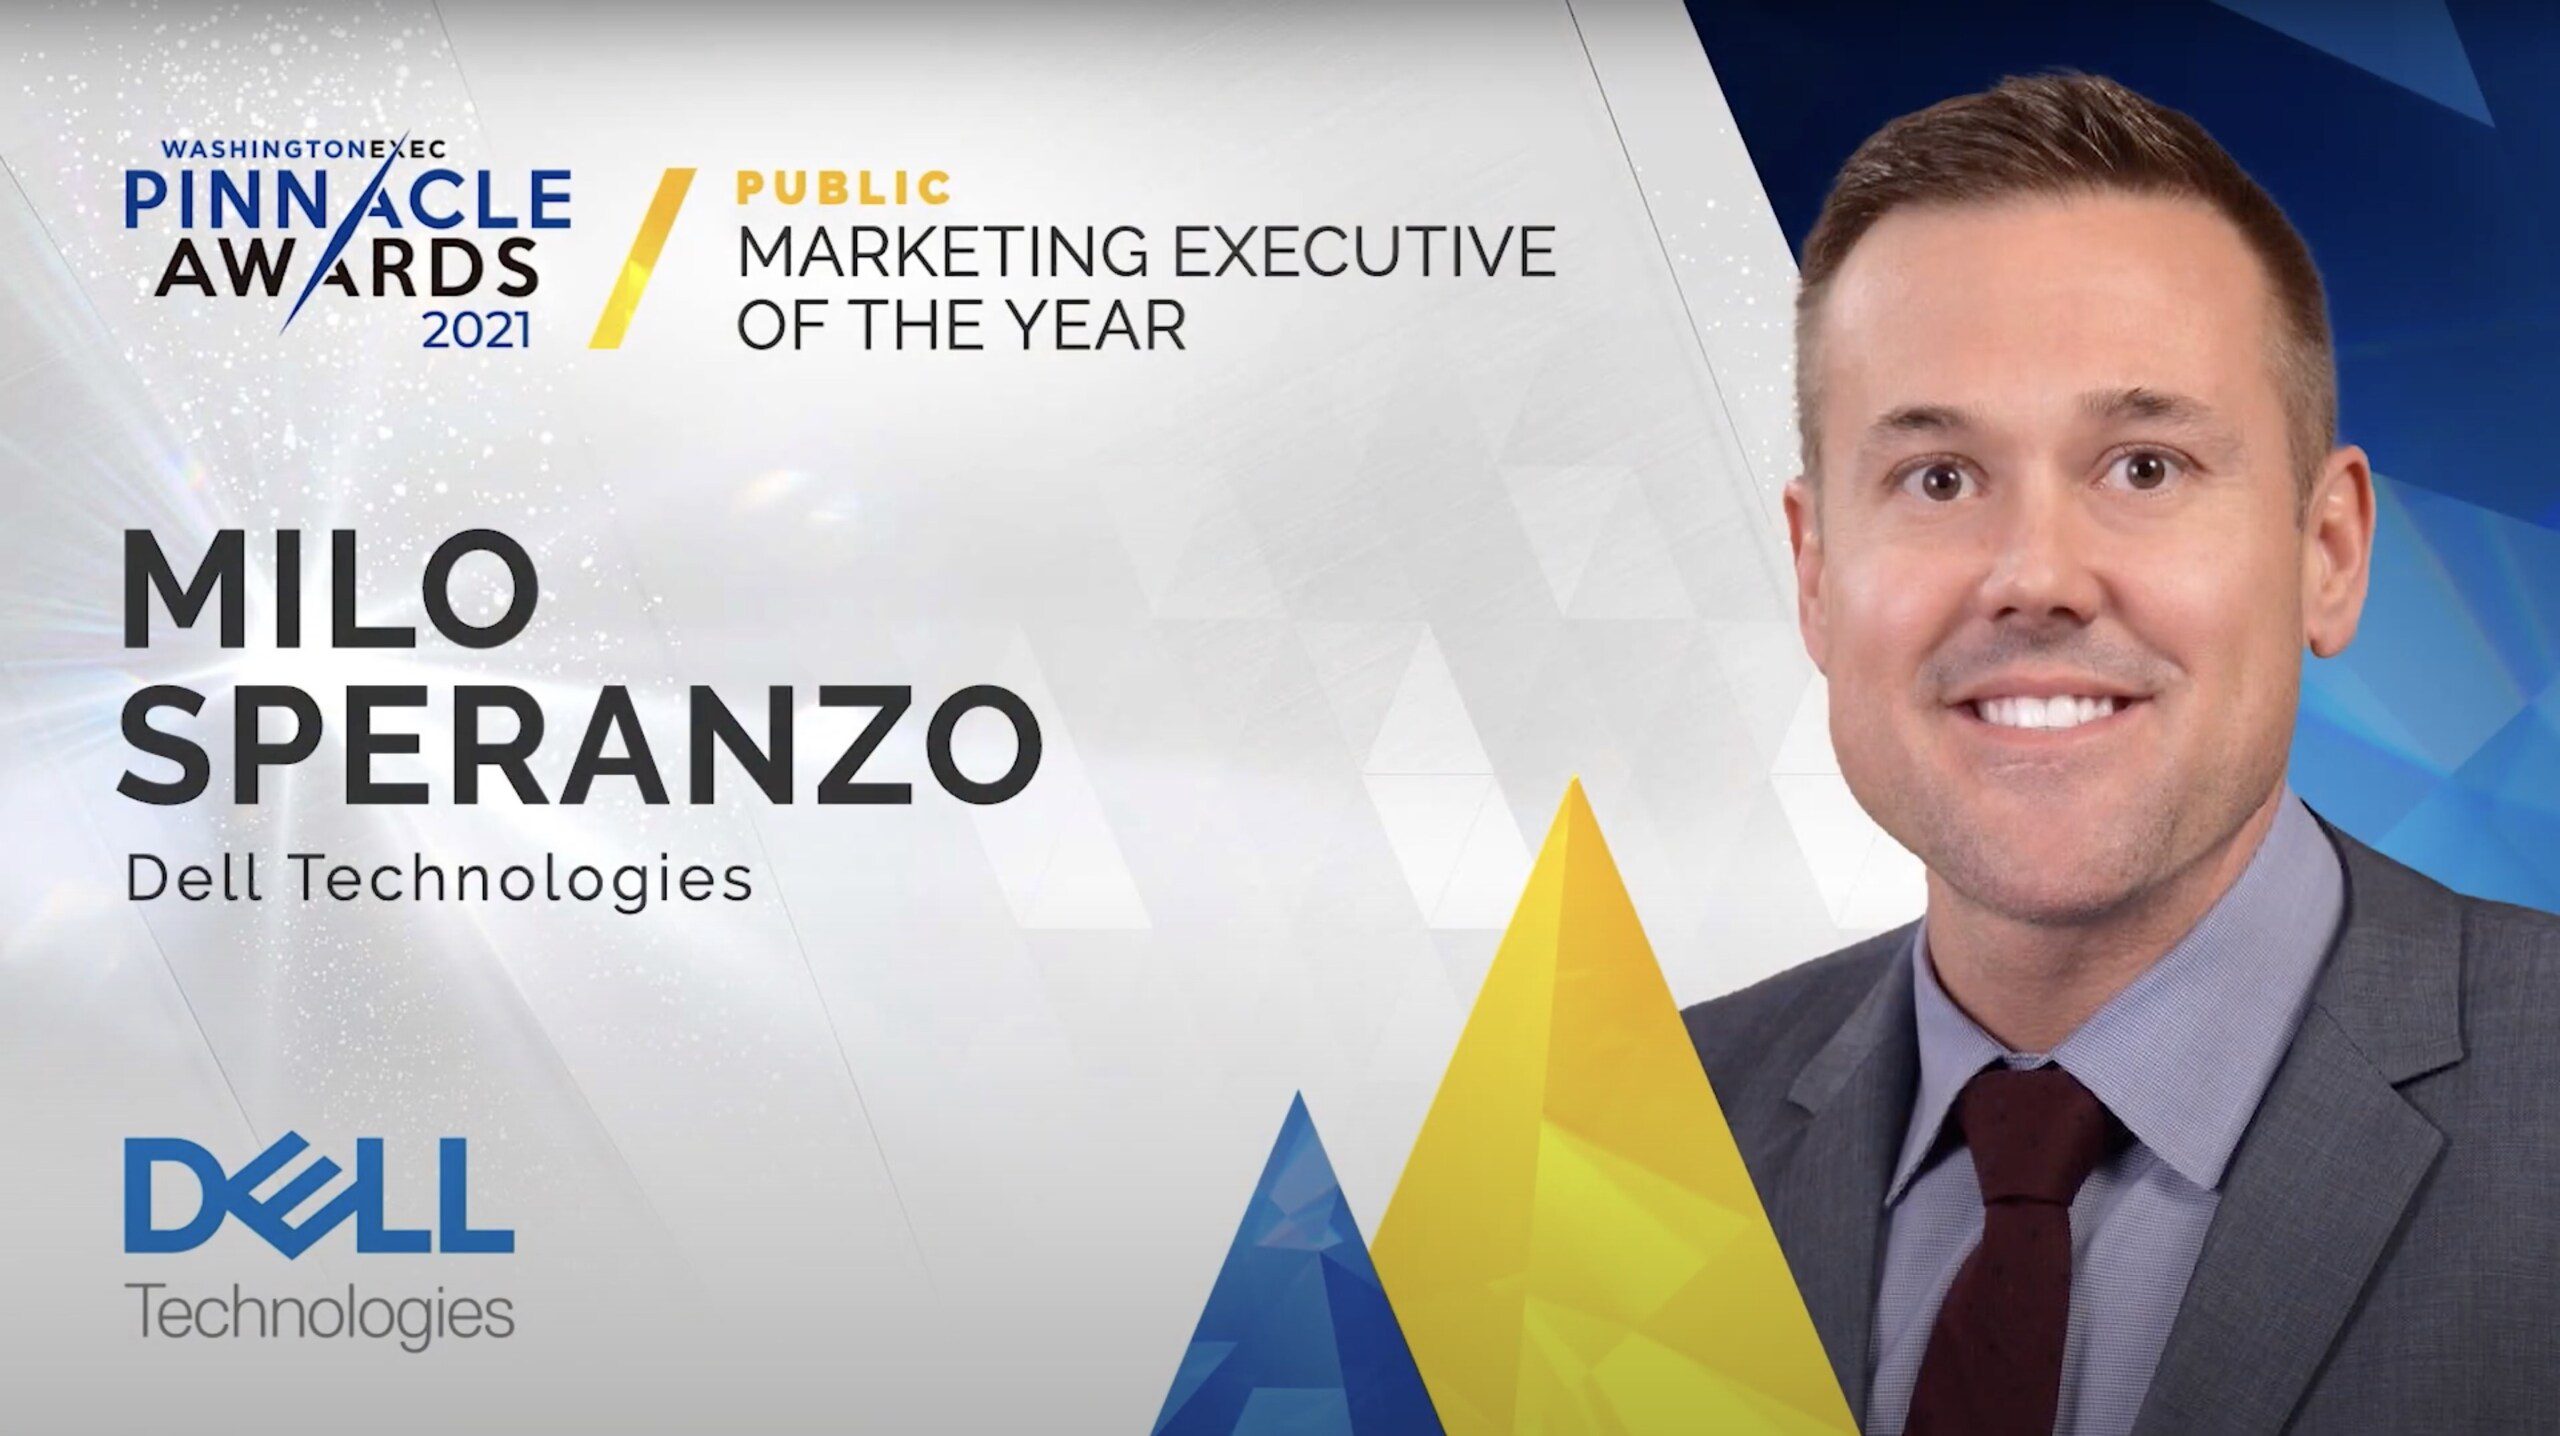 Marketing - Congratulations to Milo Speranzo from Dell Technologies on winning the award for Marketing Executive of the Year in the Public Sector